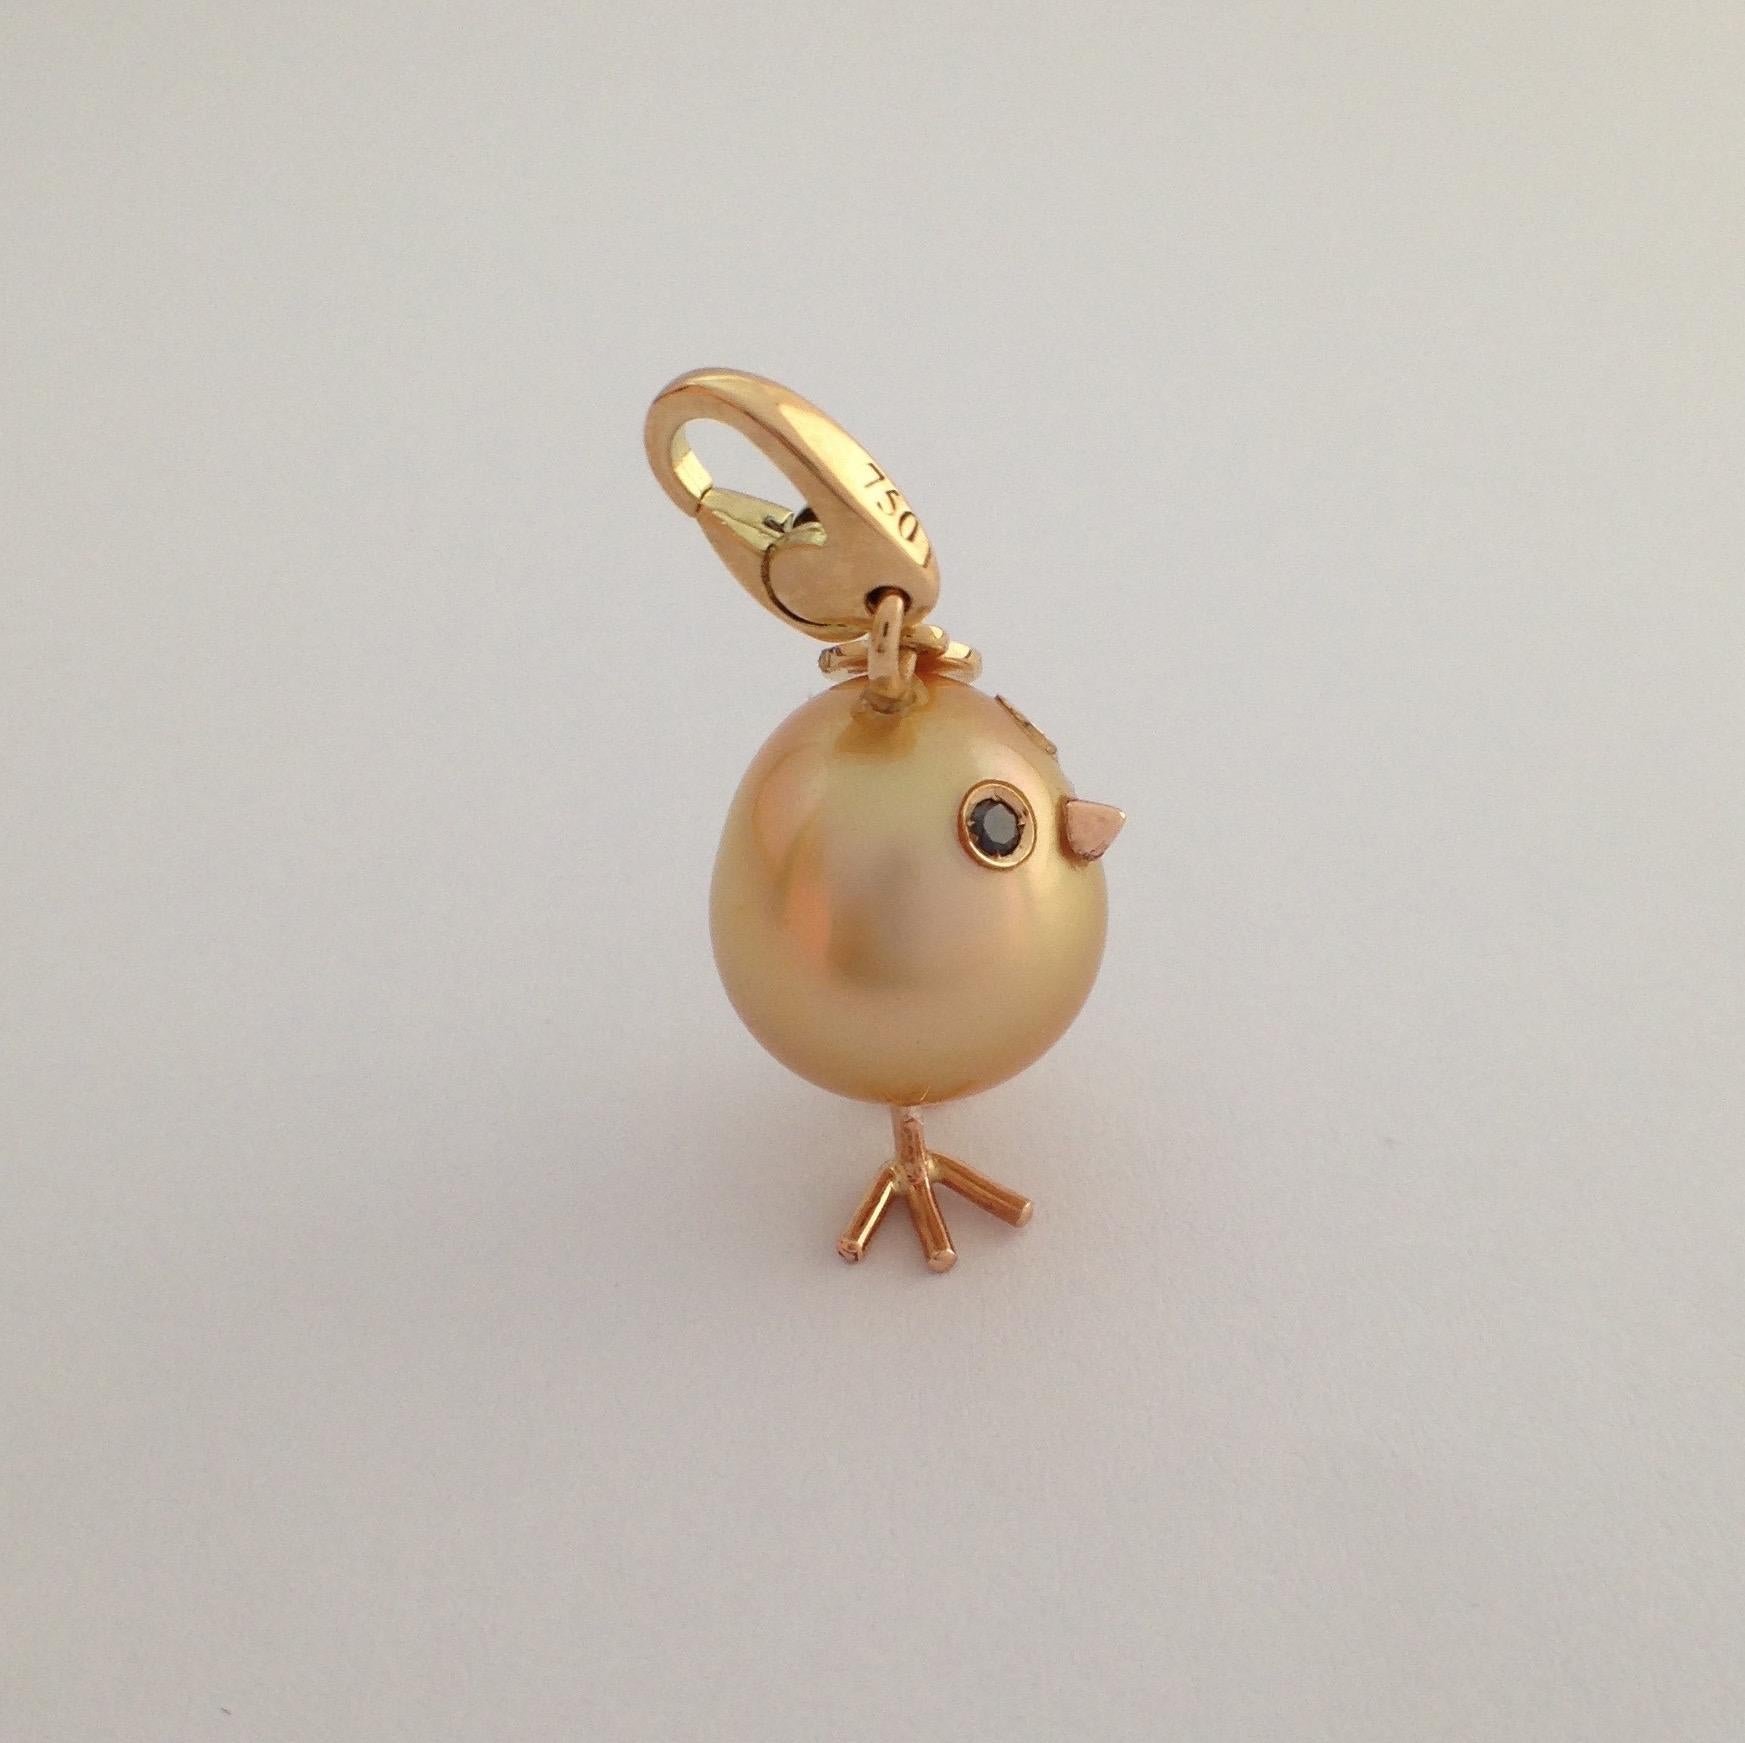 Chick Australian Pearl Diamond Yellow 18Kt Gold Pendant or Necklace
An oval shape very beautiful Australian pearl has been carefully crafted to make a chick. 
It has his two legs, two eyes encrusted with two black diamonds and his beak. 
The gold is